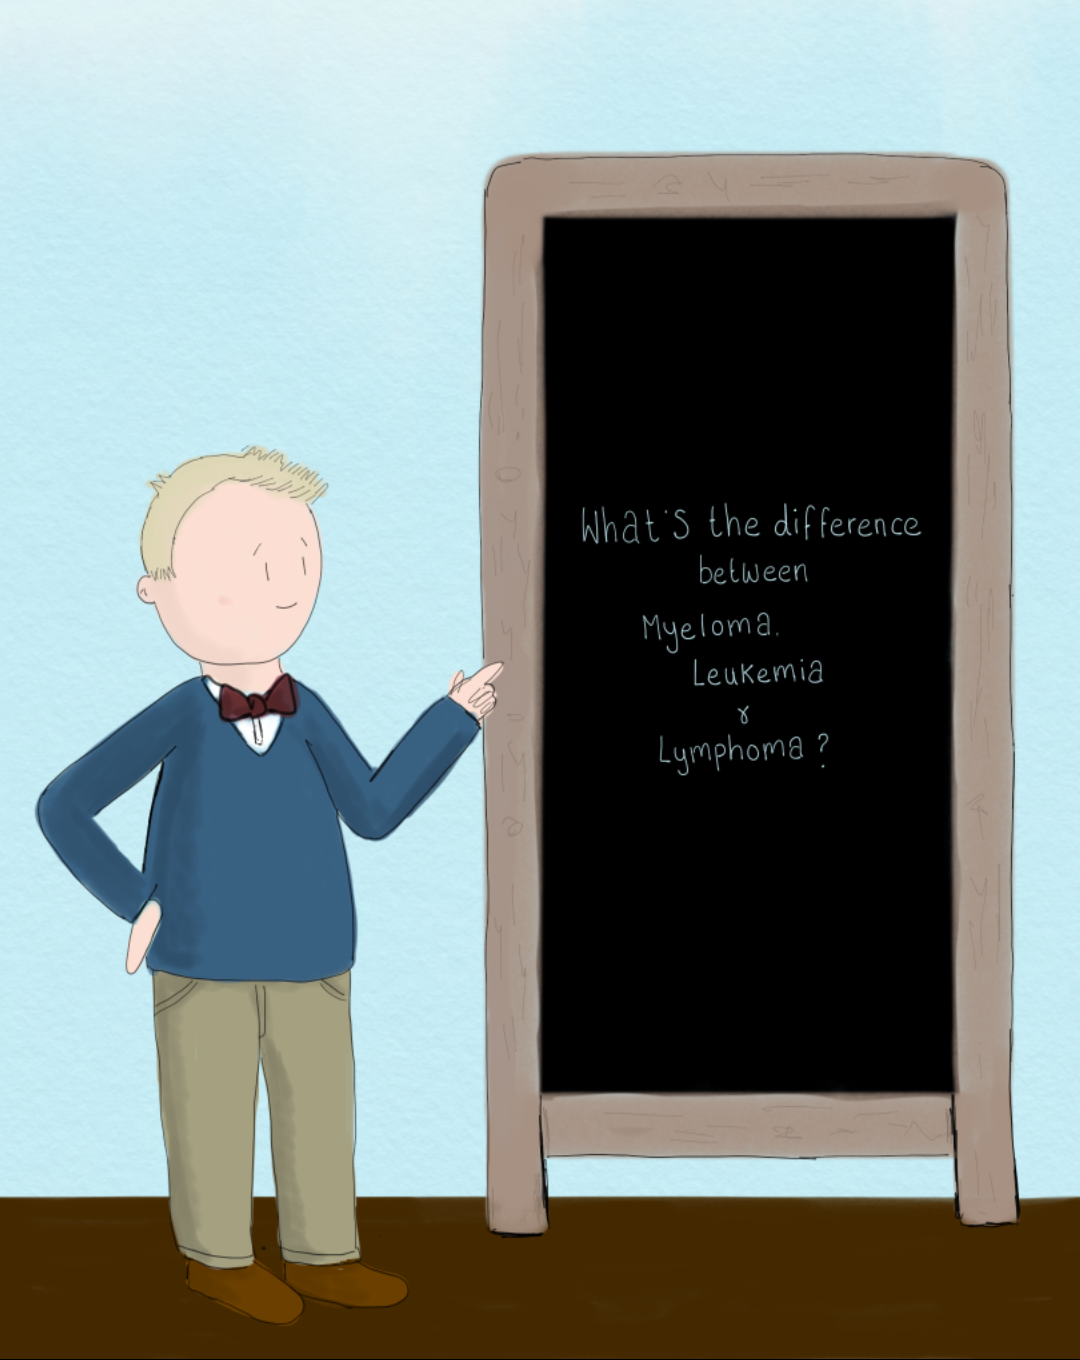 Whats the difference  - Your Question 1 - What is the difference between Myeloma, Leukemia and Lymphoma?